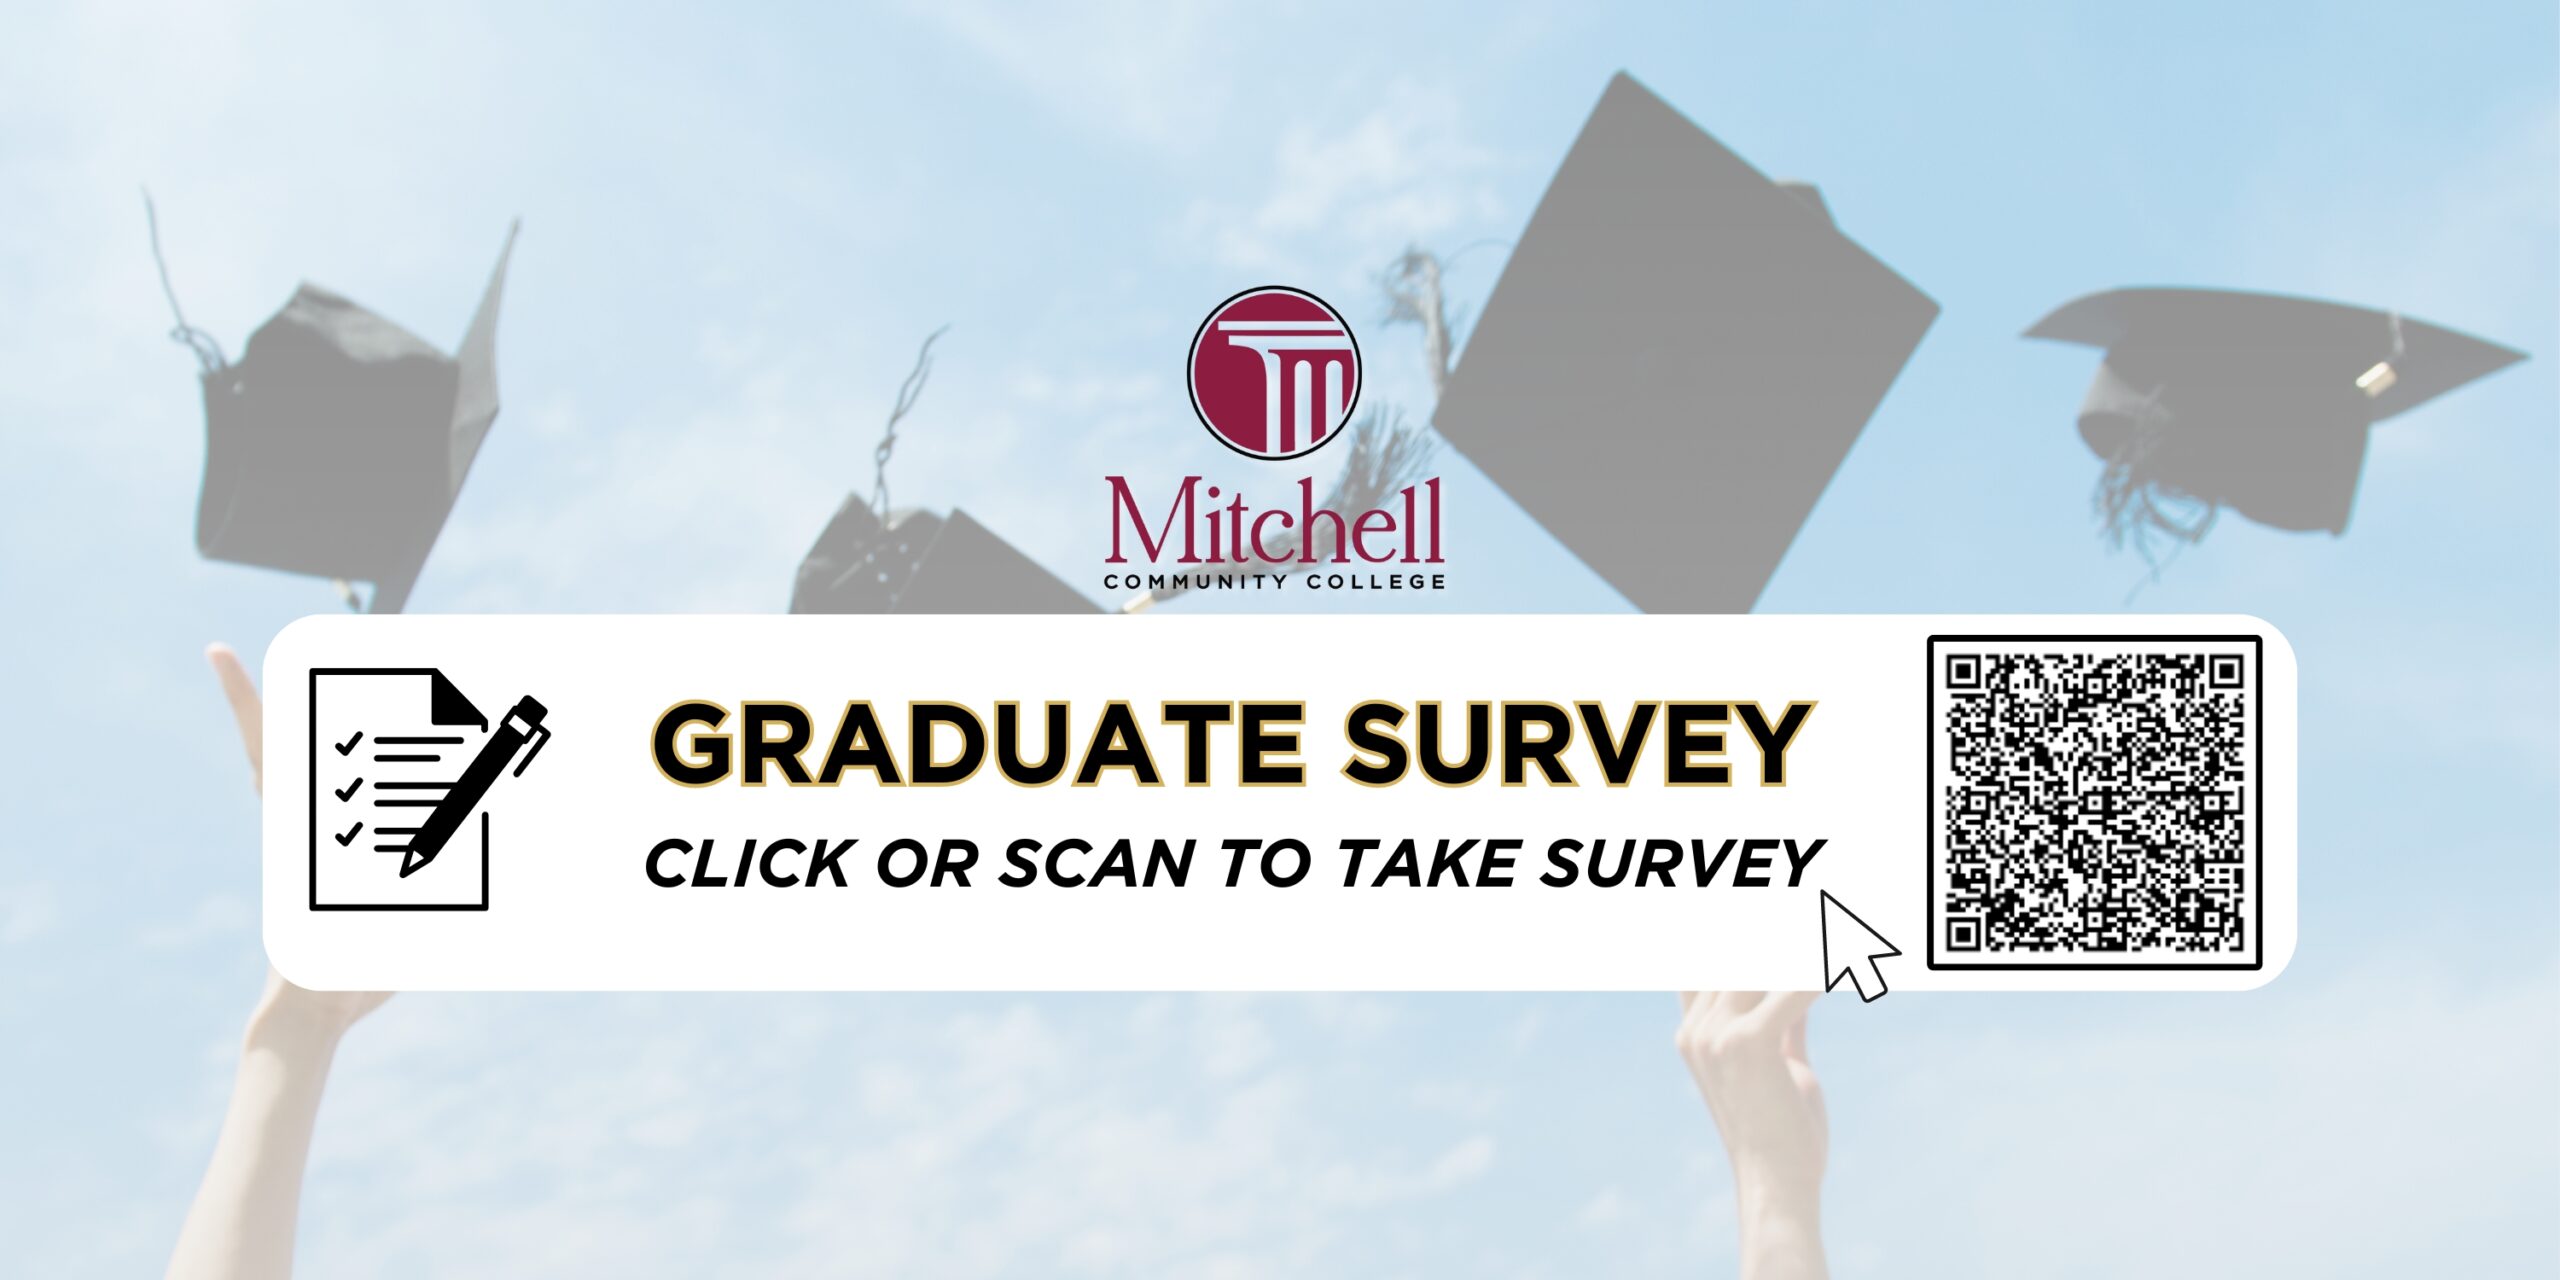 Banner that reads "Graduation Survey". Click the banner or scan the QR code to access the survey.